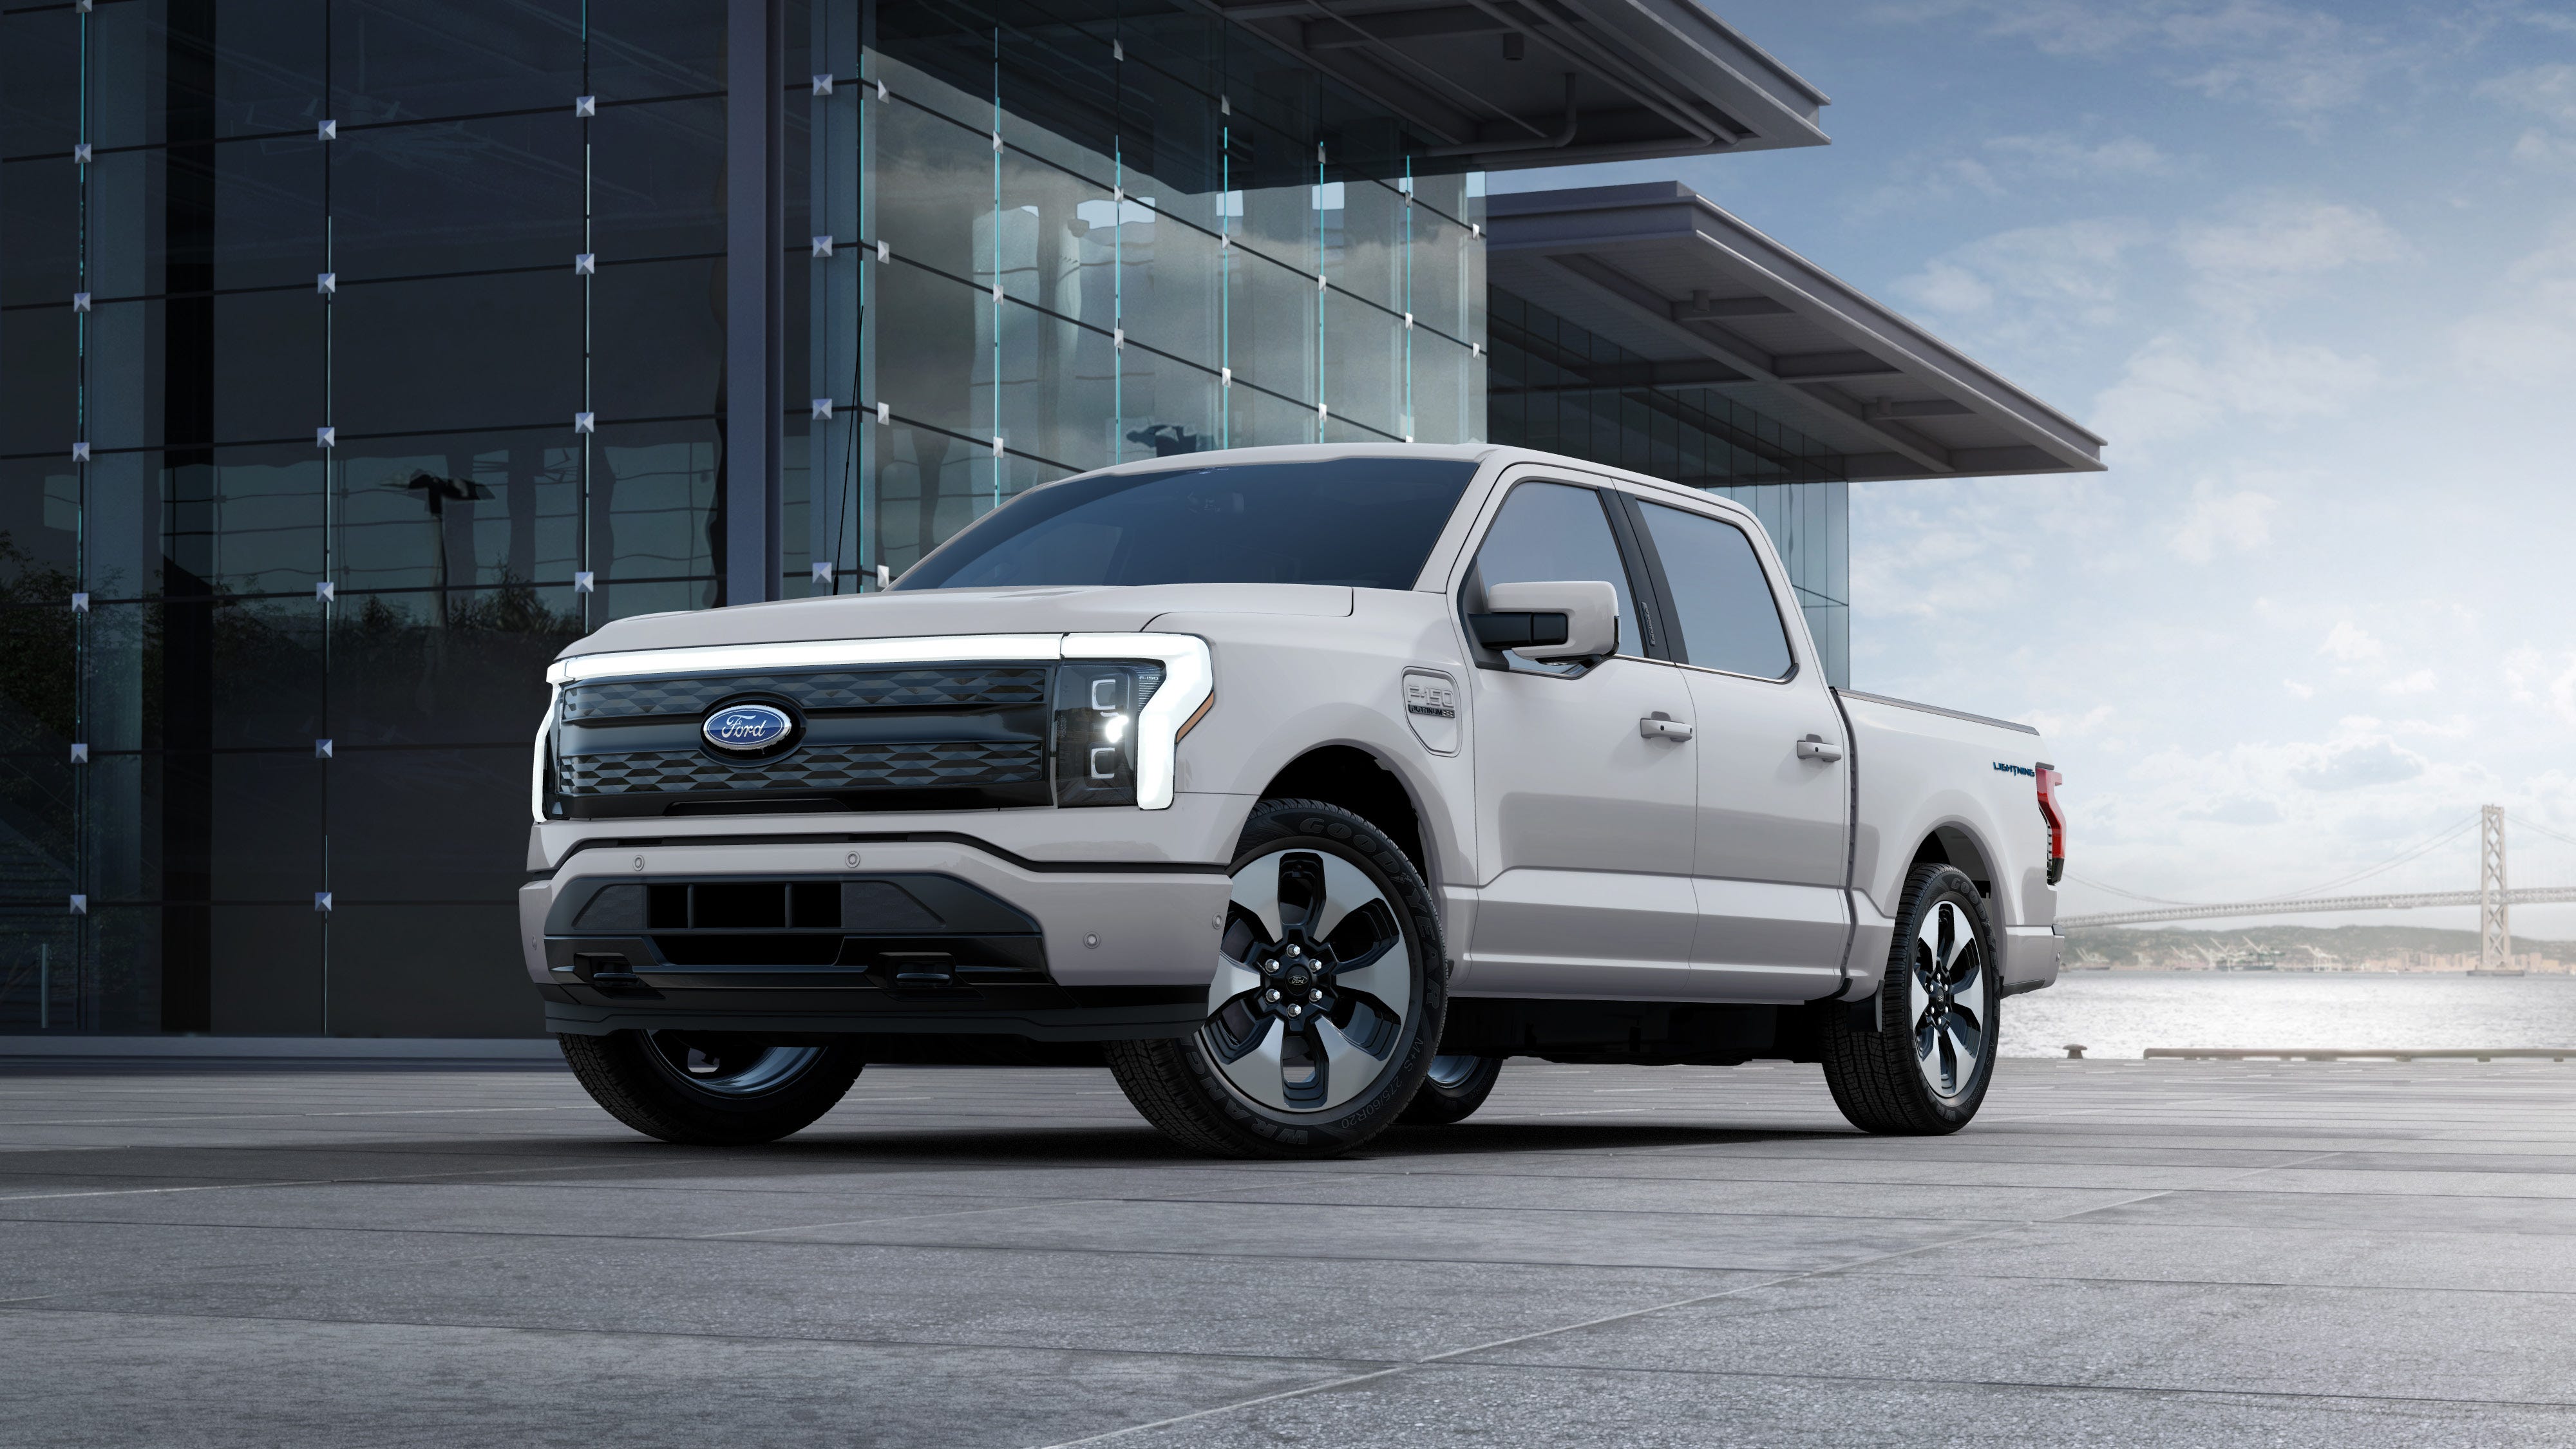 What to know about Ford's electric vehicle F-150 Lightning